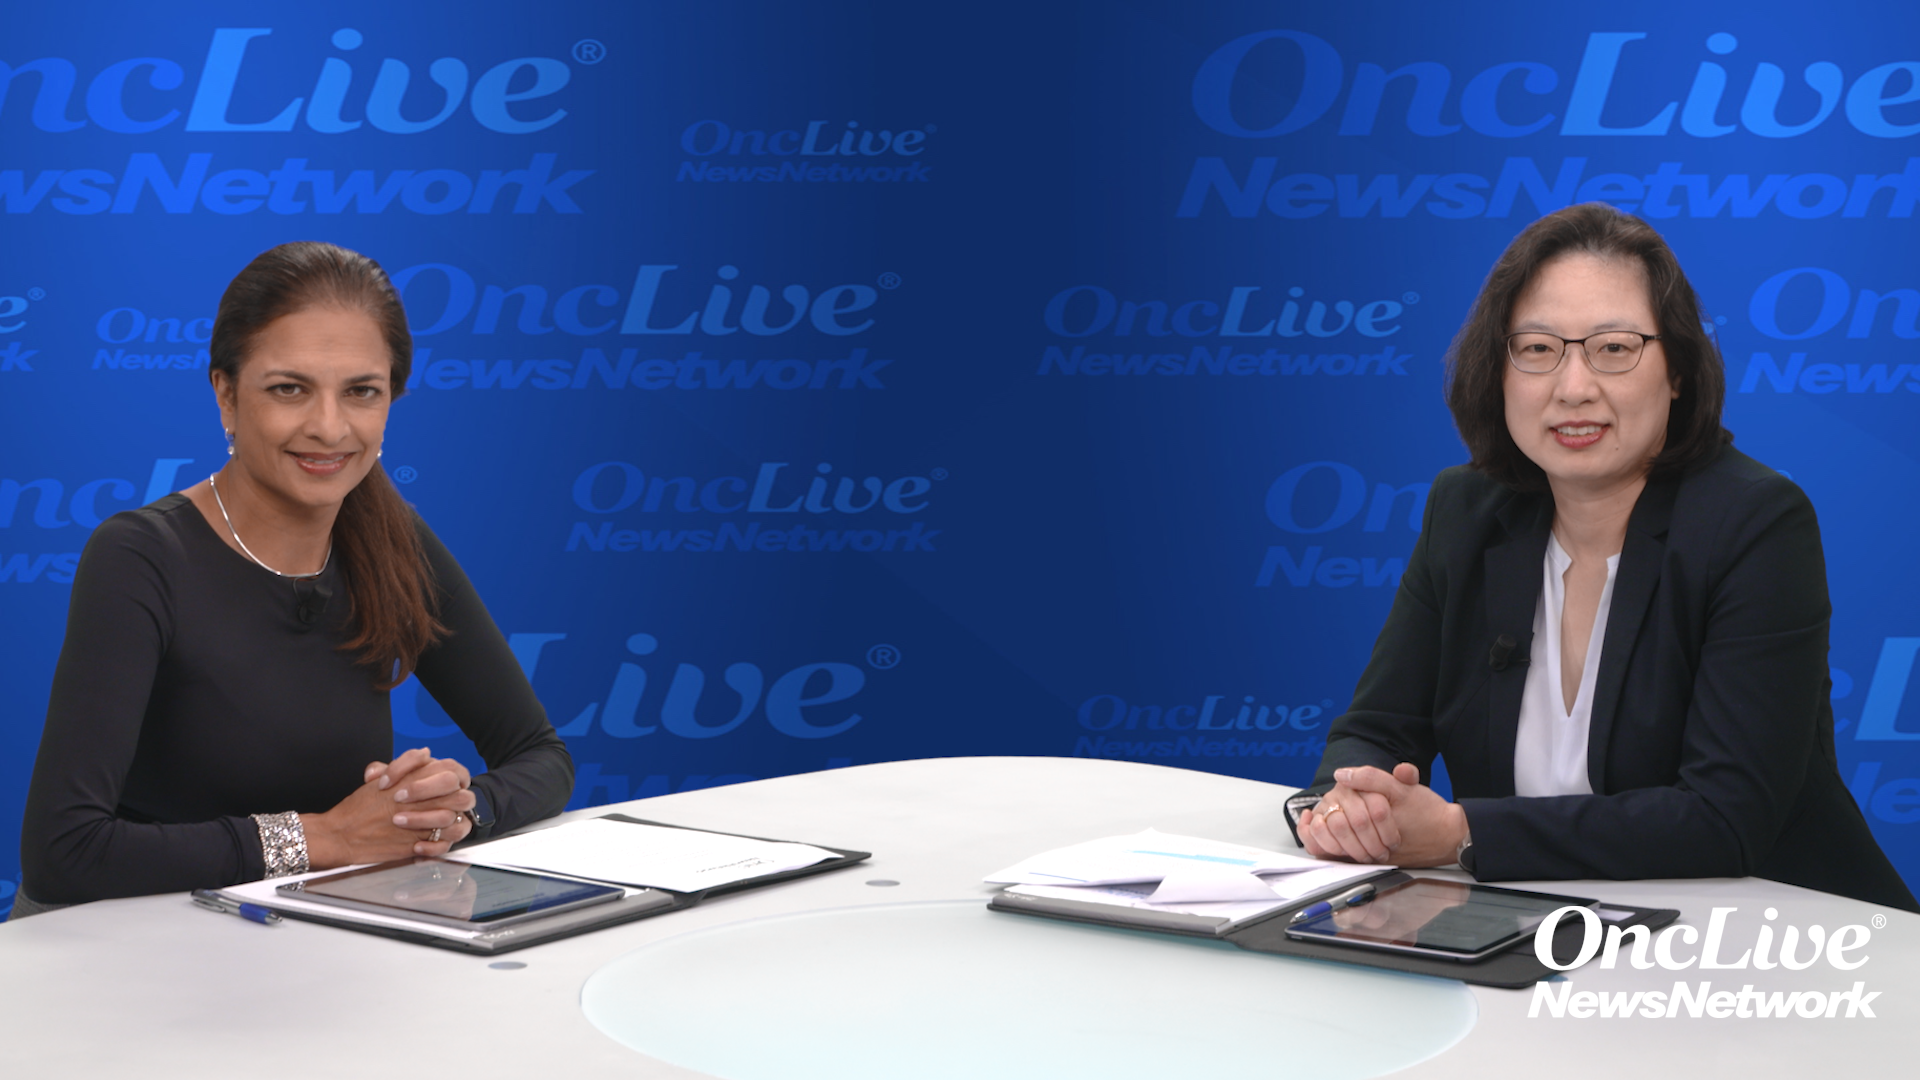 Post-Conference Perspectives: Urothelial Carcinoma 2022 Year in Review